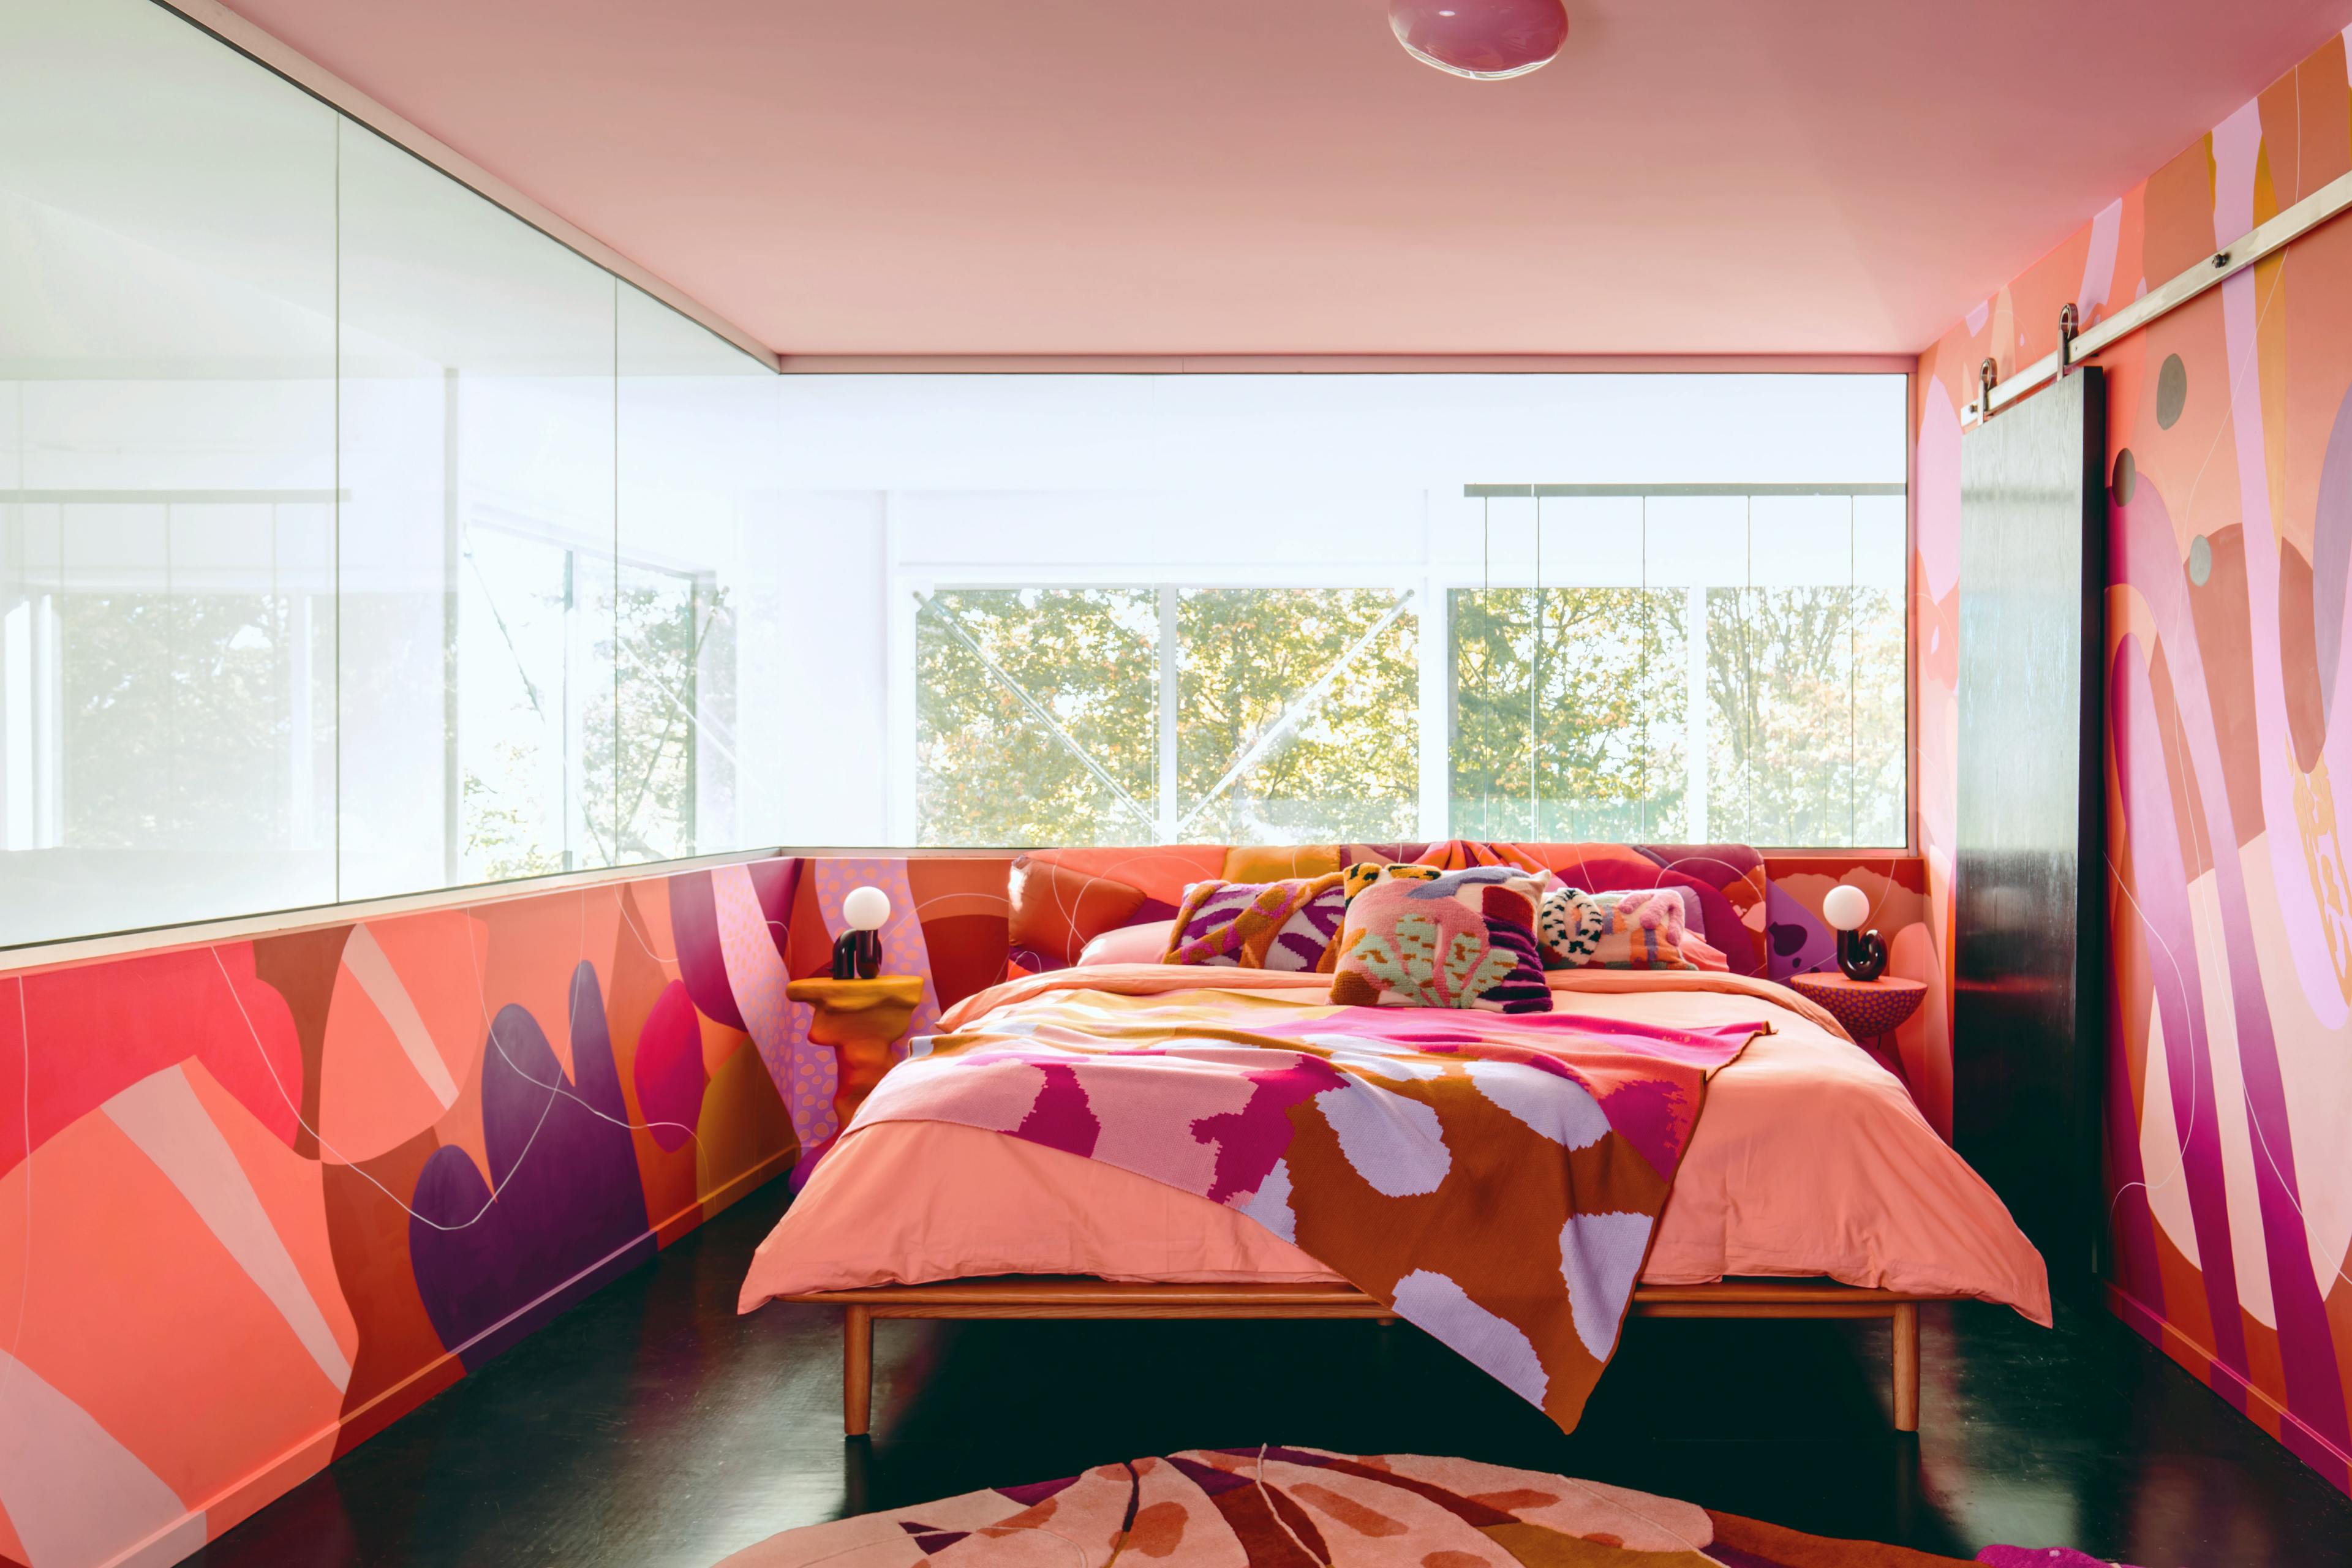 Alex Proba's bedroom with colorful wall murals and bedding.